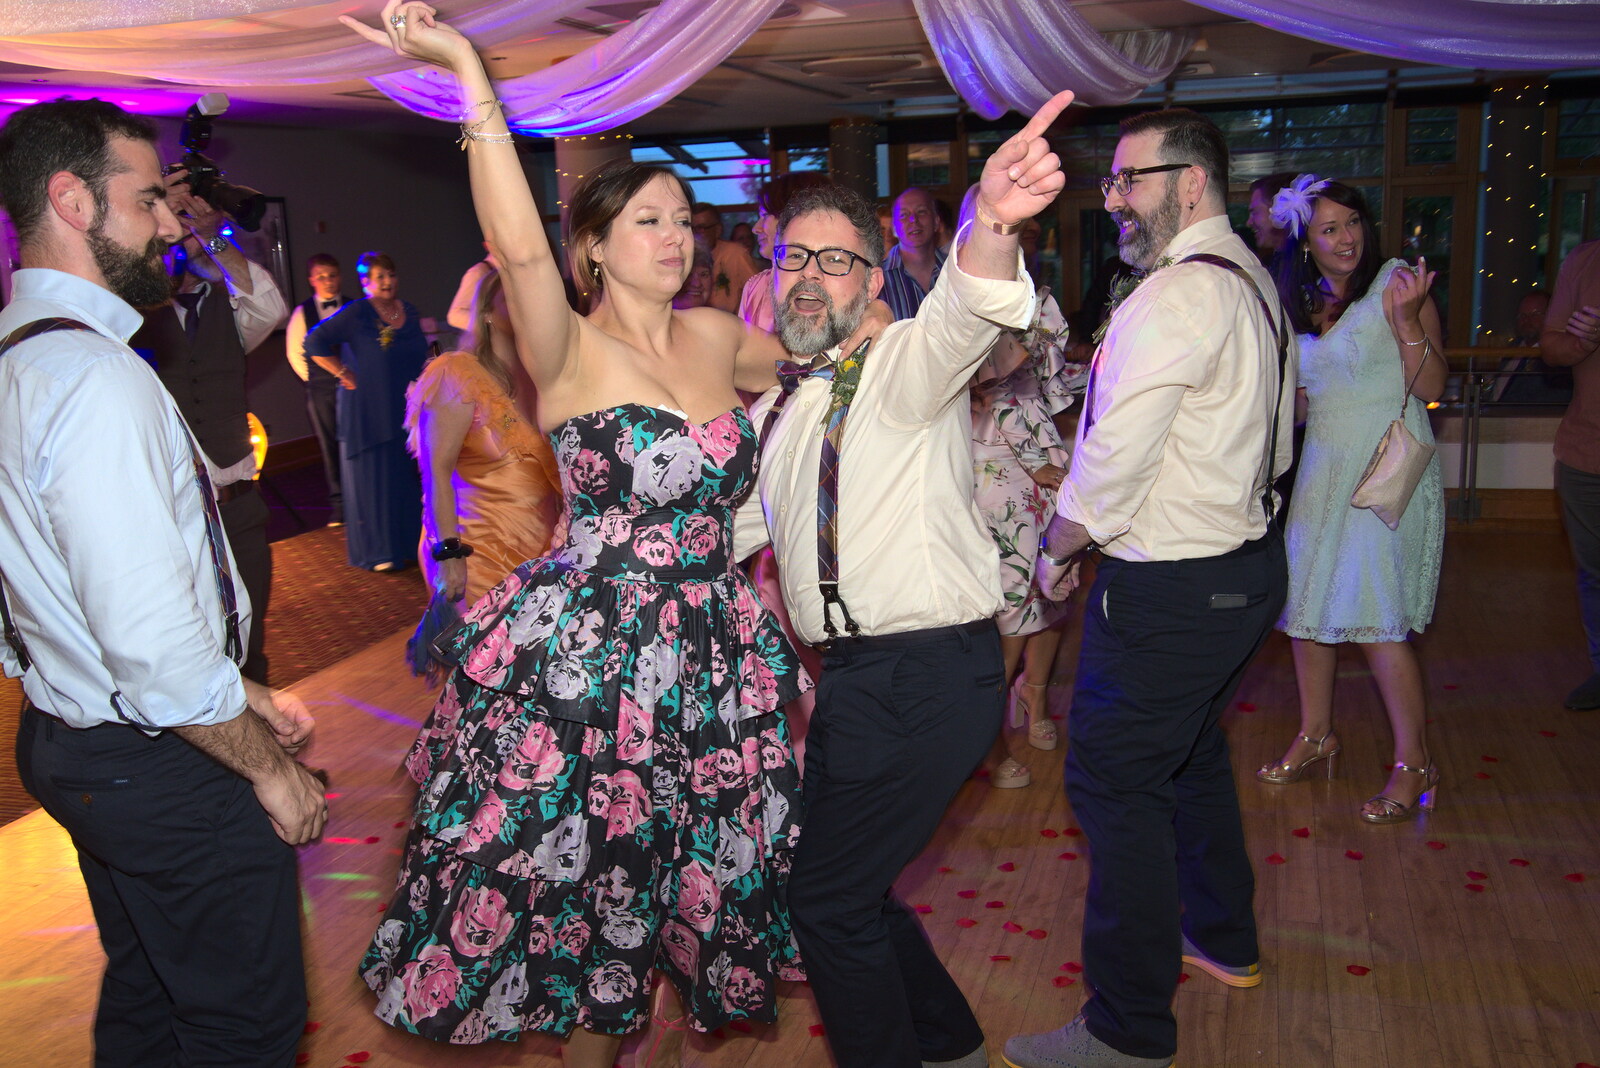 The other guests join in from Petay's Wedding Reception, Fanhams Hall, Ware, Hertfordshire - 20th August 2021